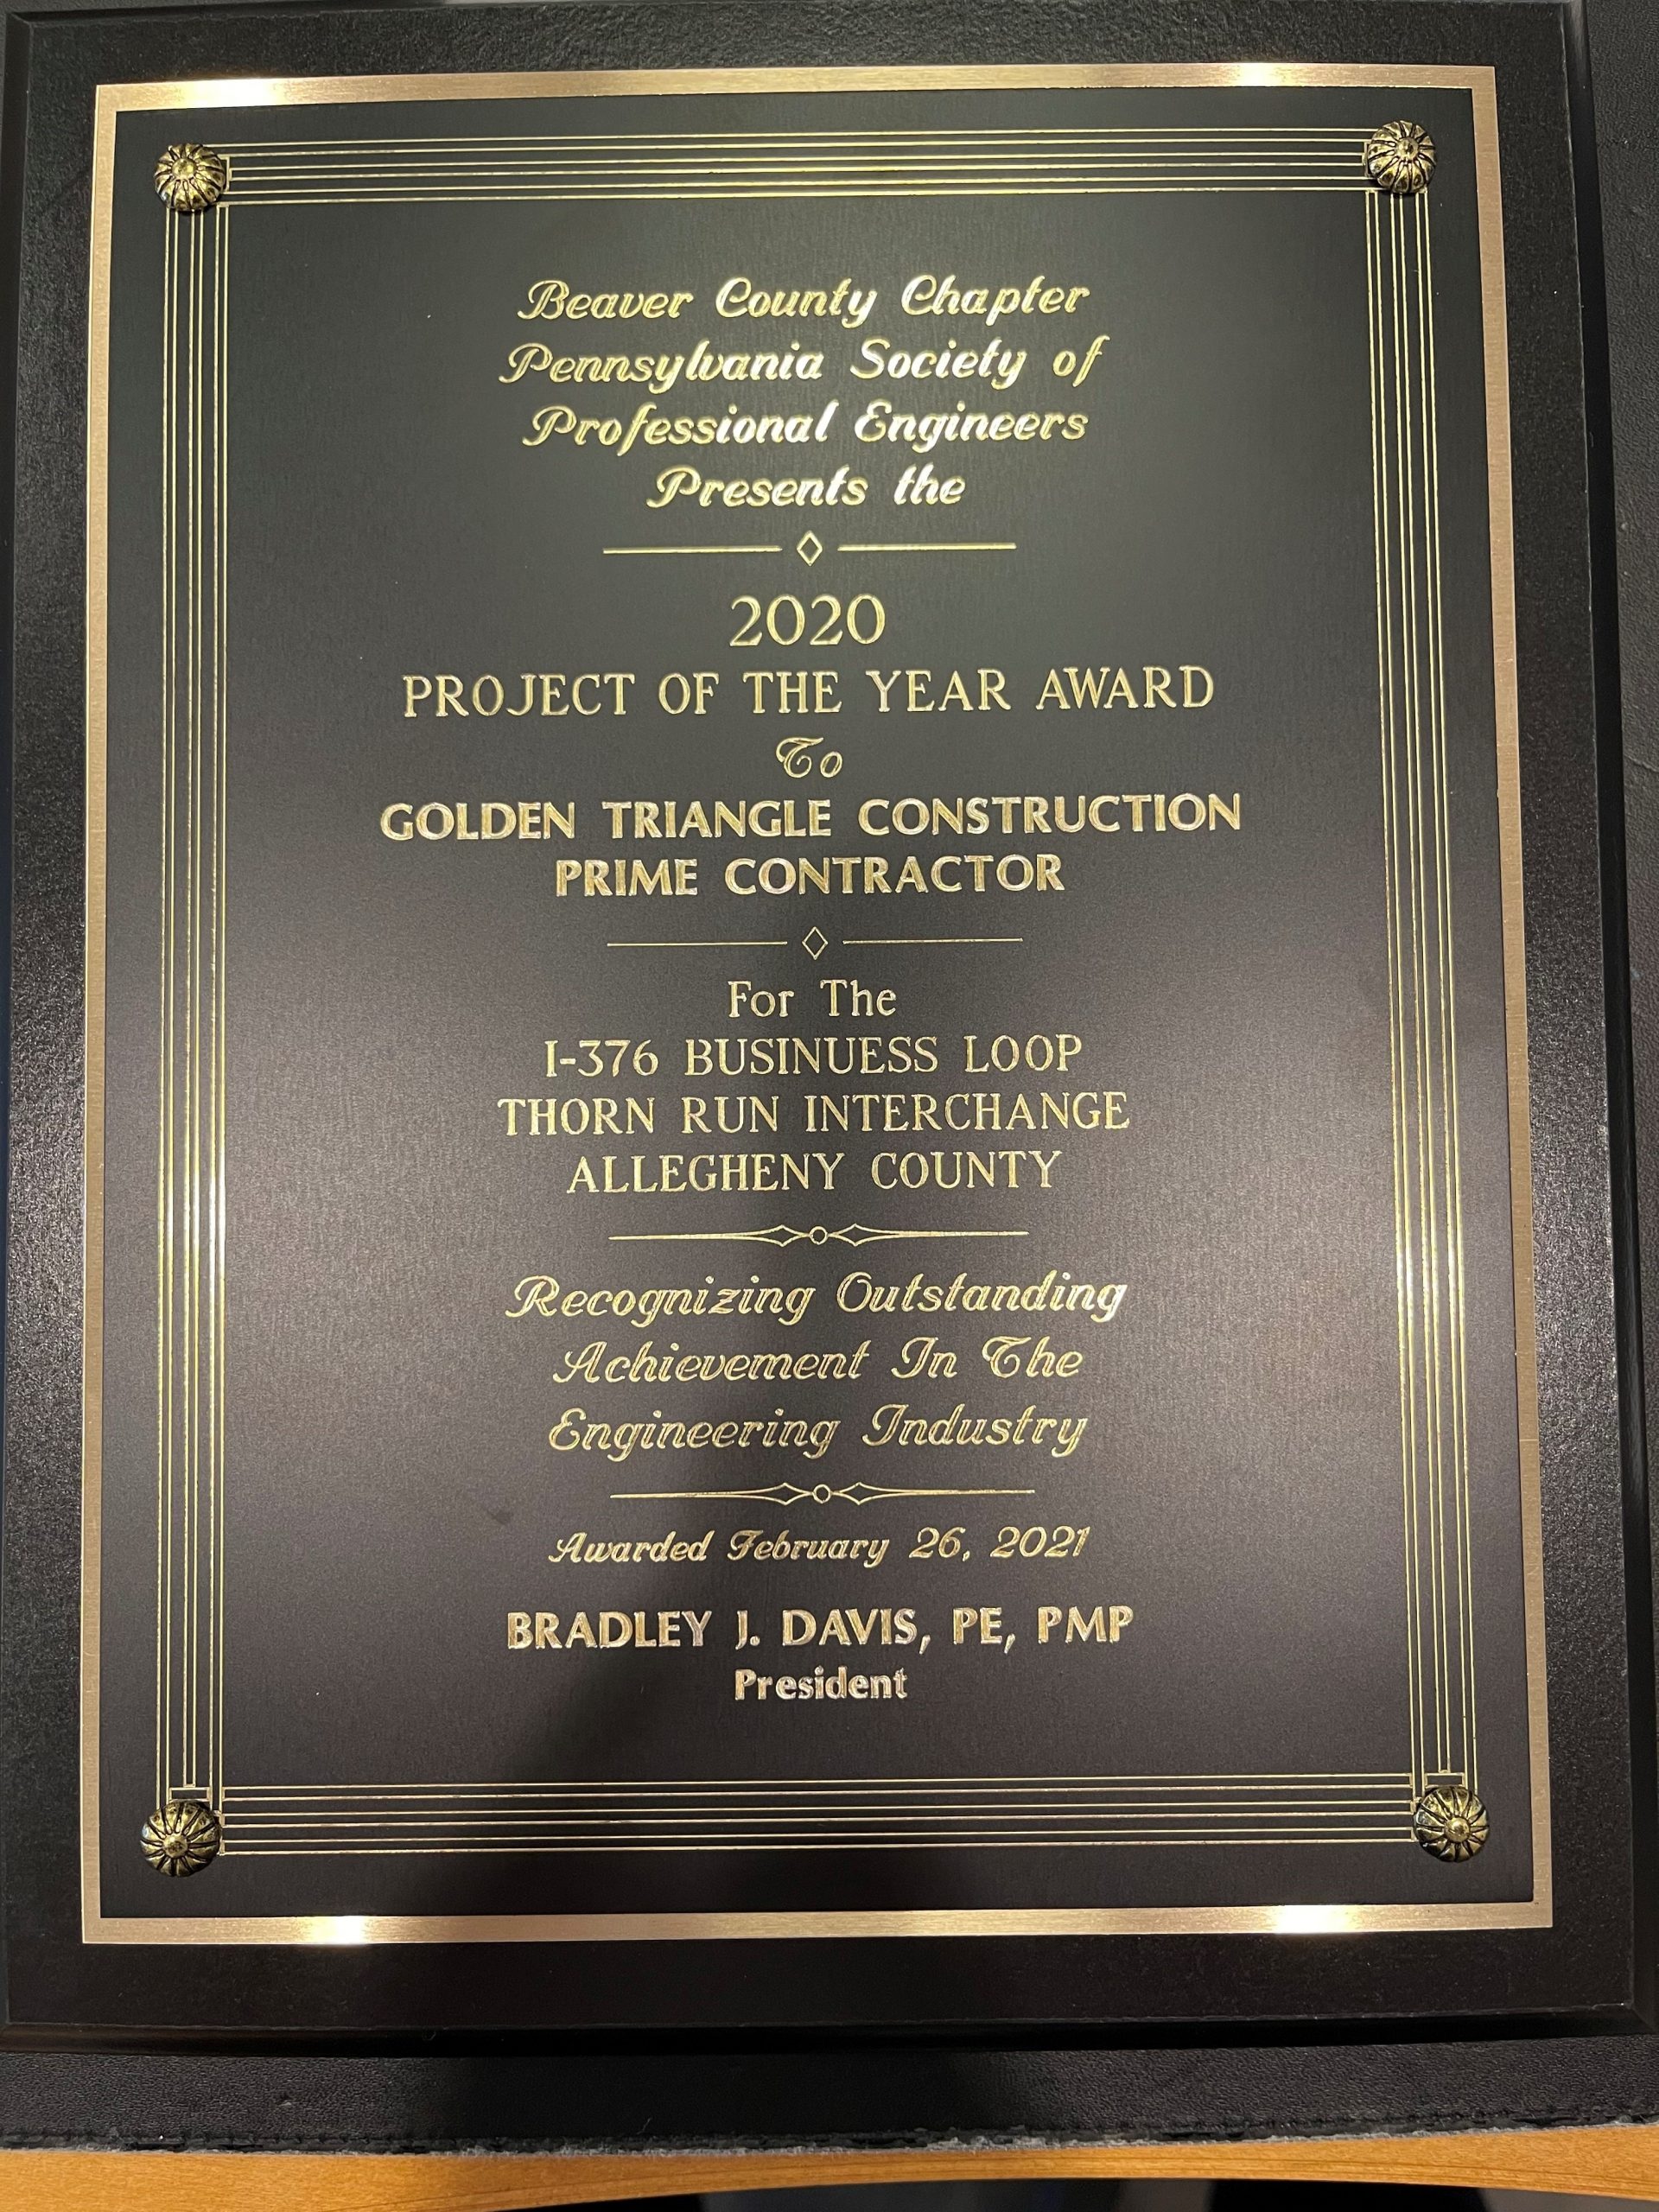 Project of the Year Award!